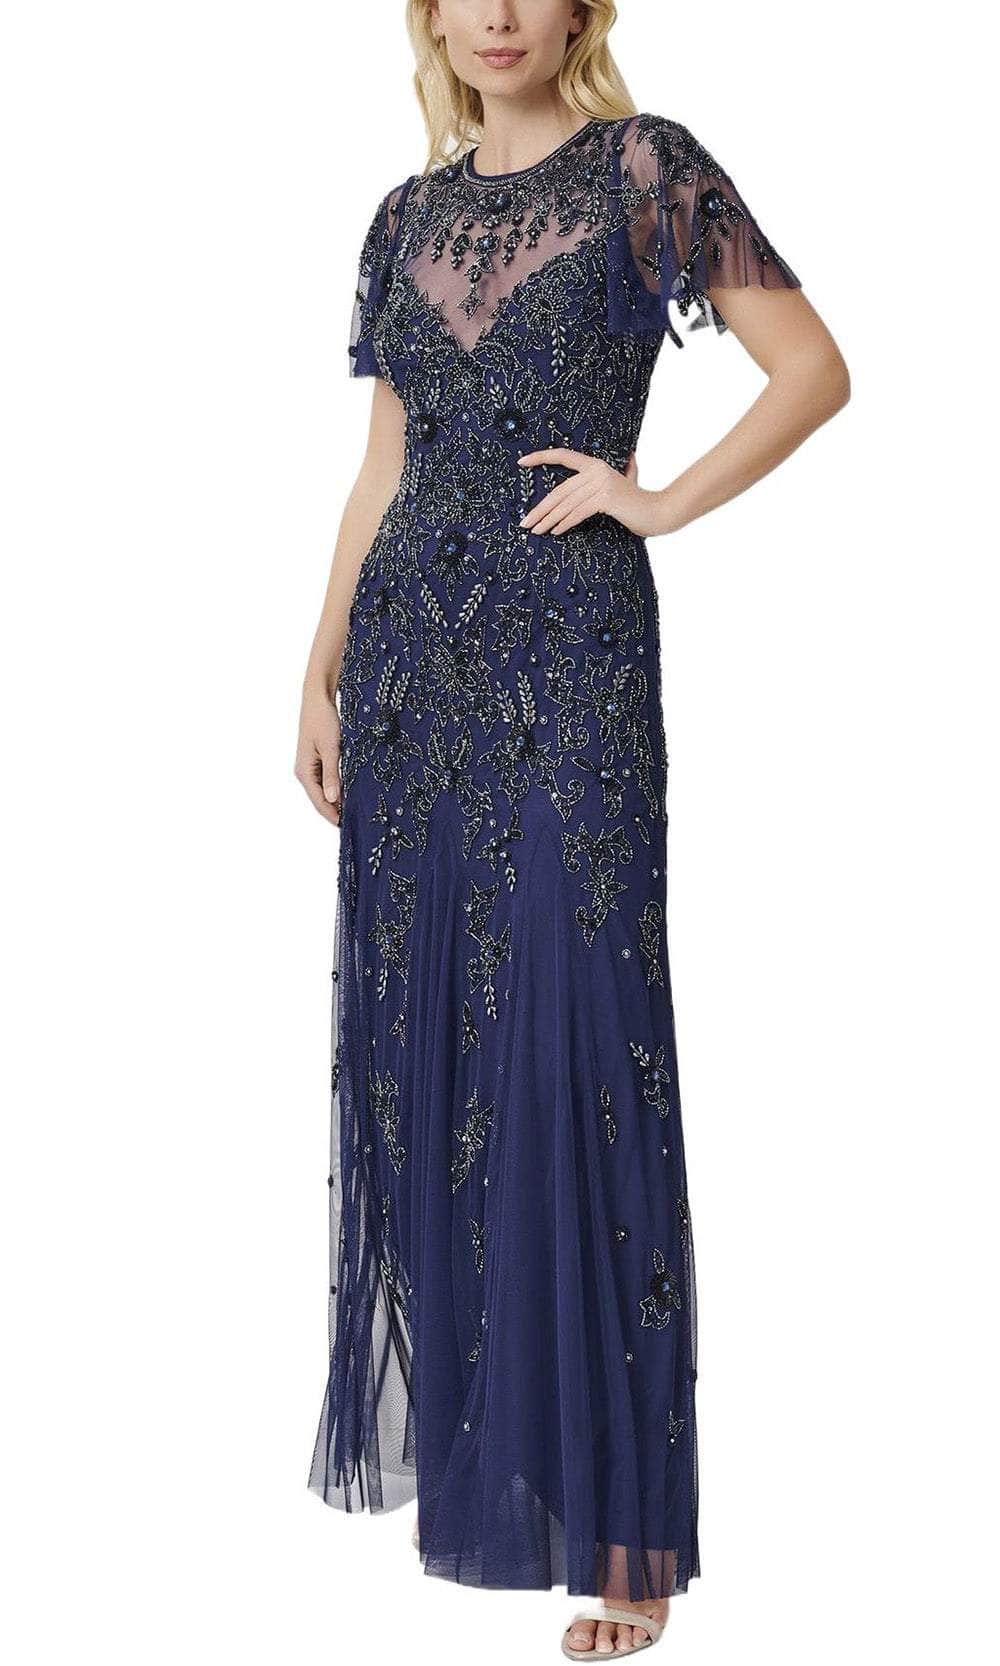 Aidan Mattox MD1E207347 - Beaded Illusion Neckline Embellished Gown
